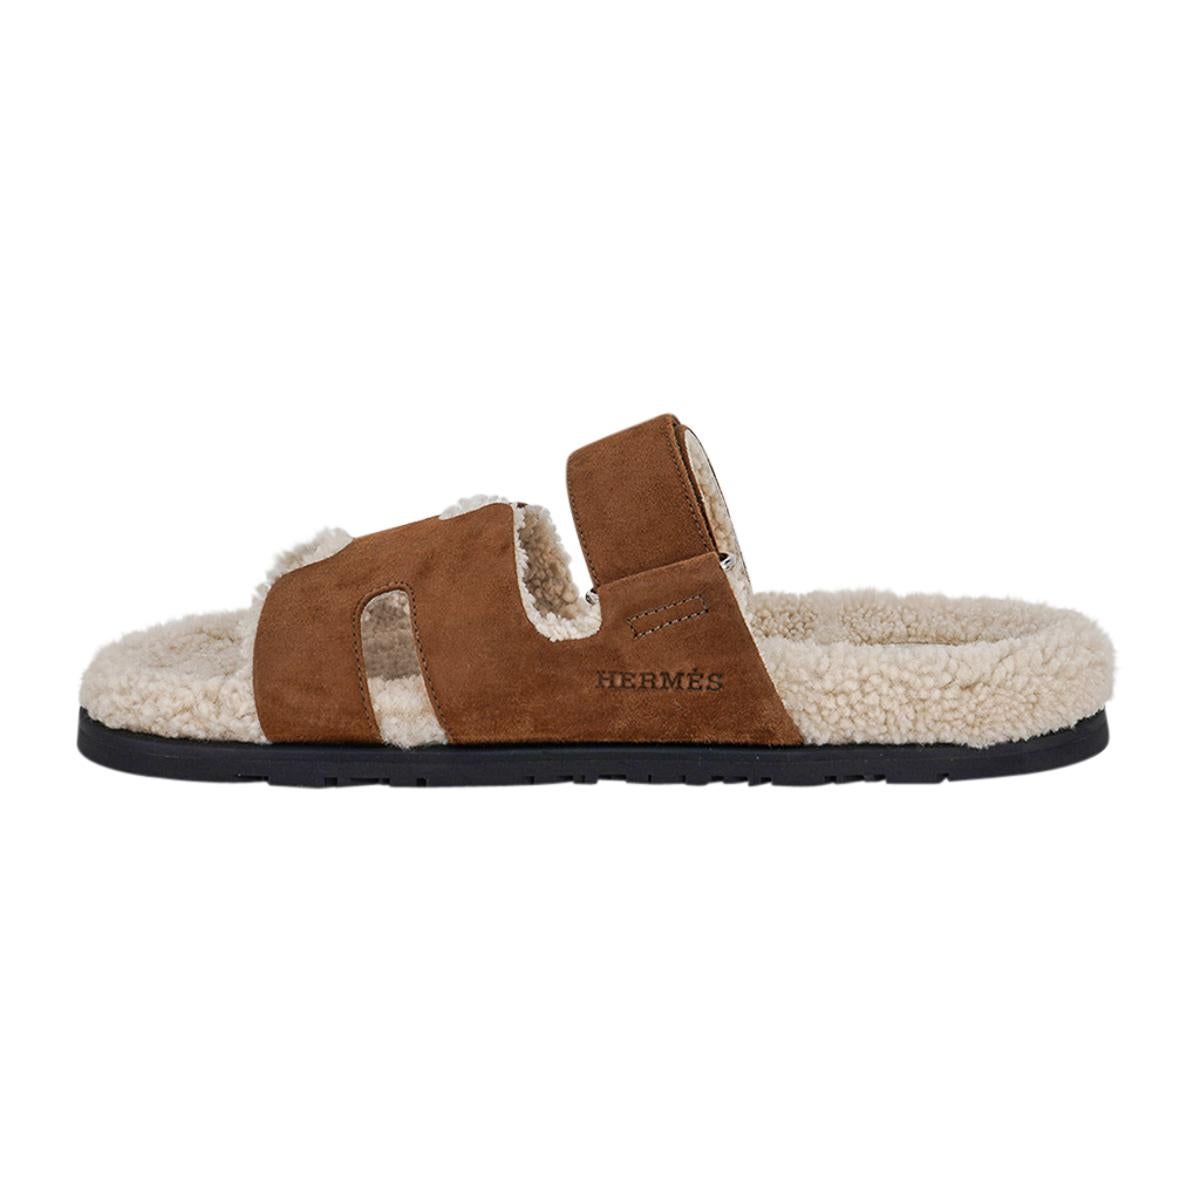 hermes fuzzy chypre sandals